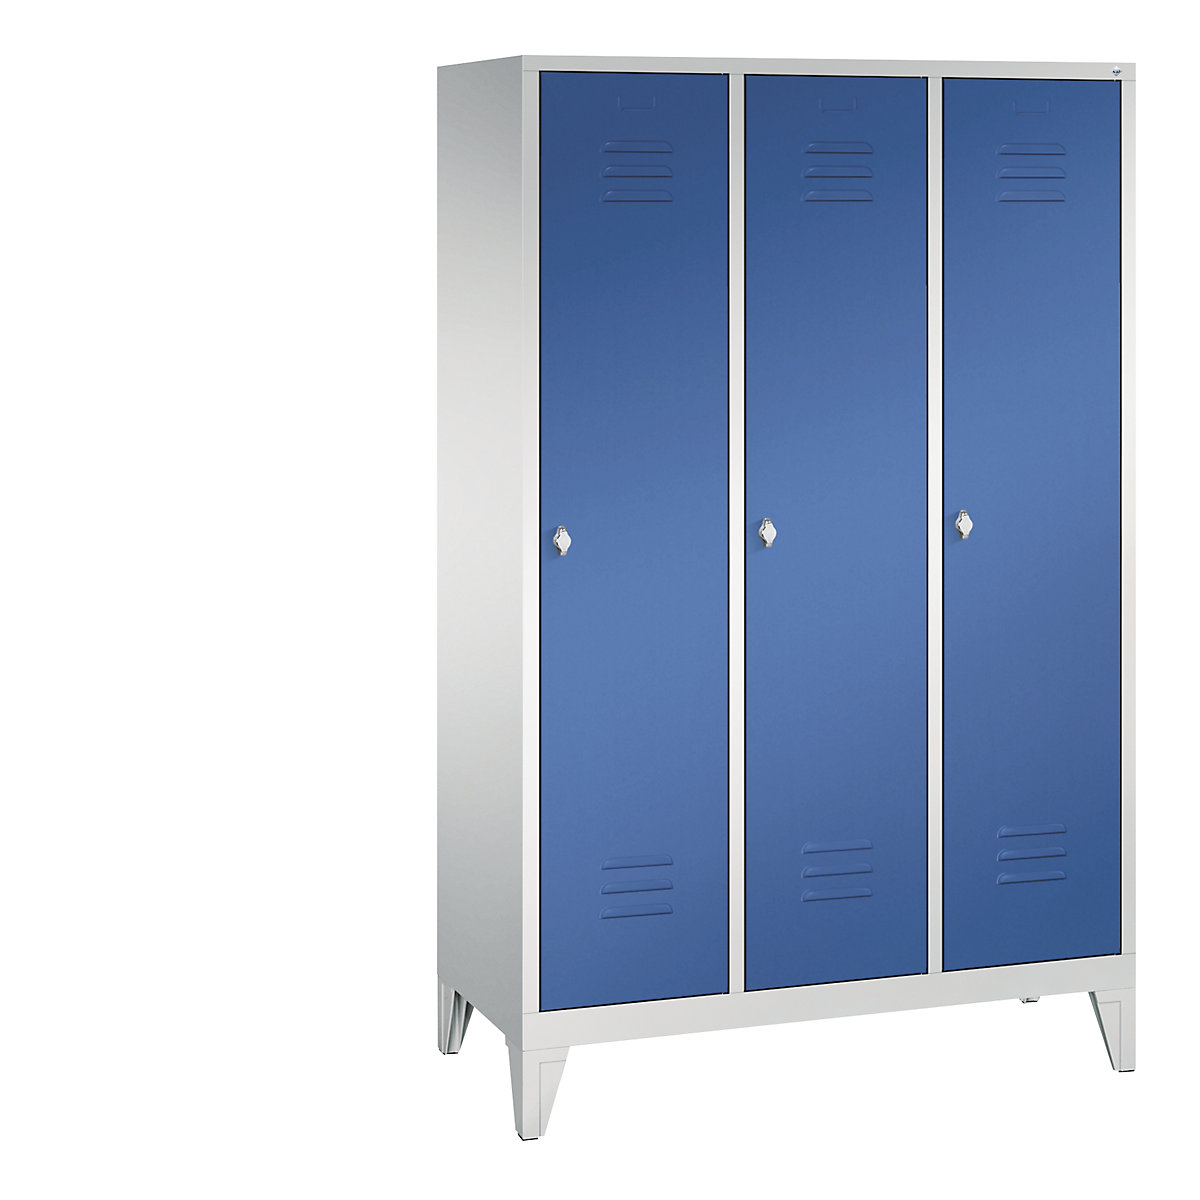 CLASSIC cloakroom locker with feet – C+P, 3 compartments, compartment width 400 mm, light grey / gentian blue-10